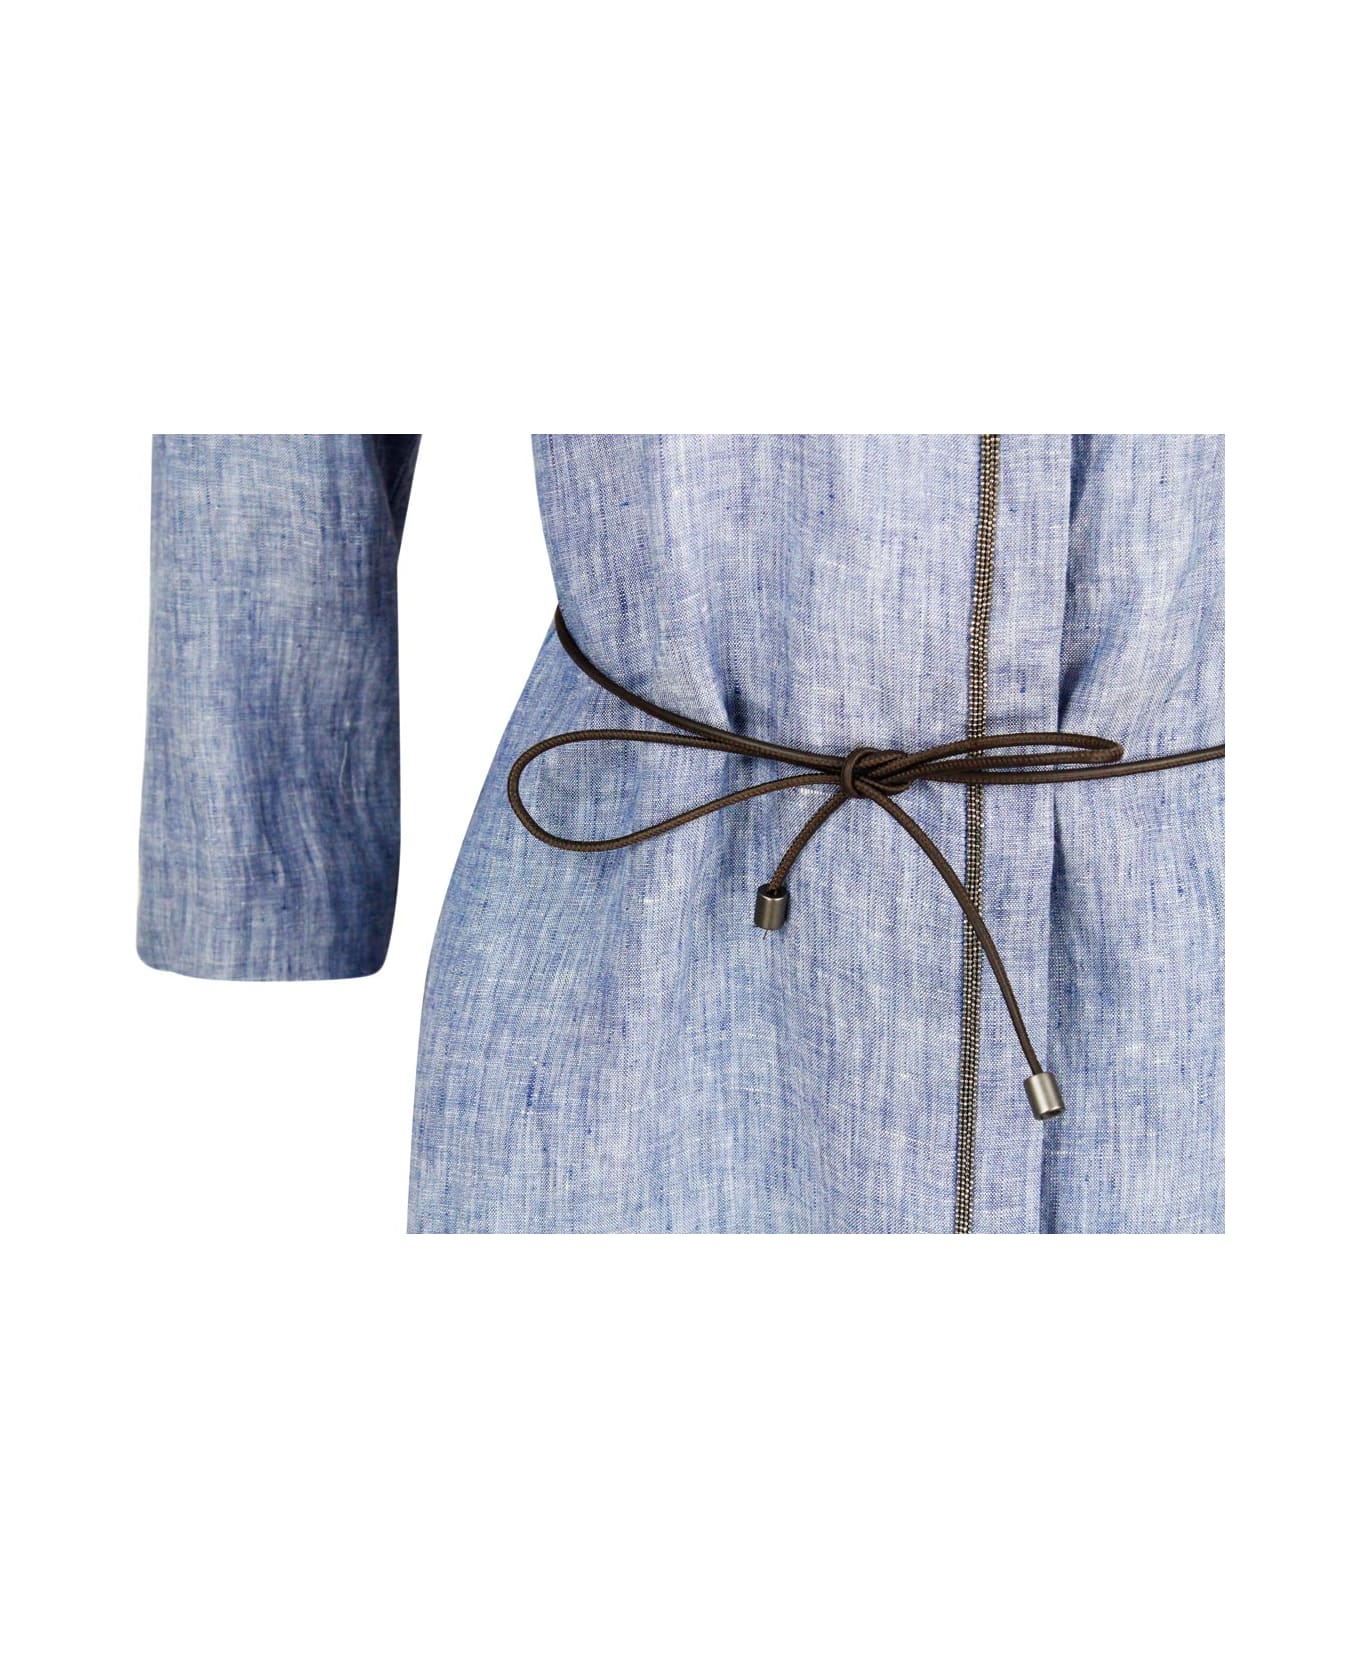 Fabiana Filippi Long Linen Shirt With Leather Belt And Embellished With Brilliant Jewels Along The Buttoning - LIGHT PASTEL BLUE                                                     